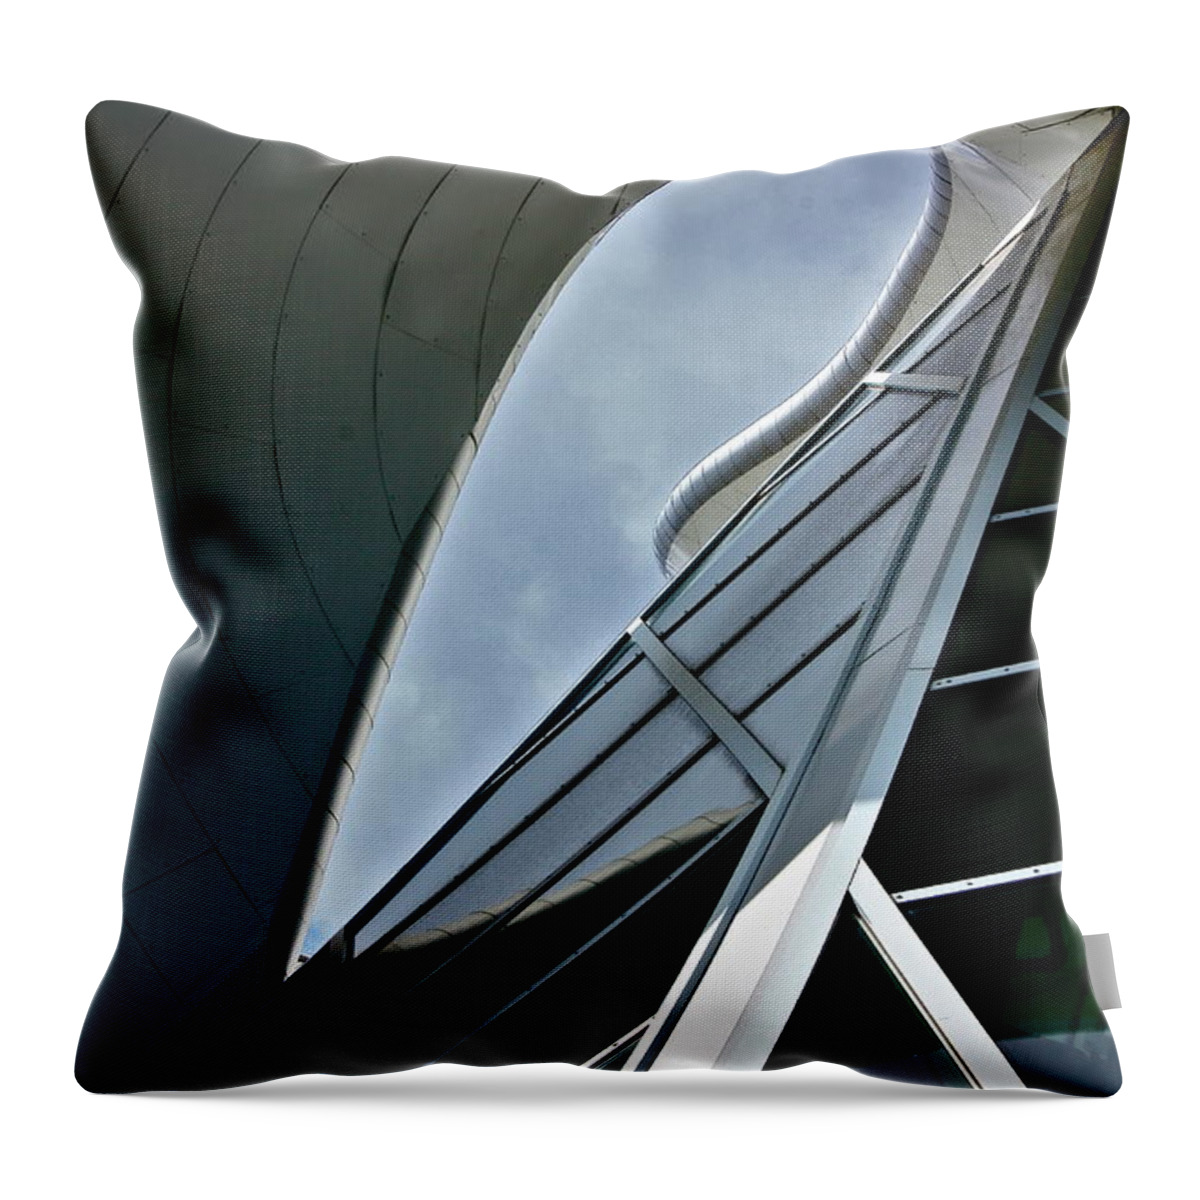 Art Throw Pillow featuring the photograph Outer Space by Linda Bianic